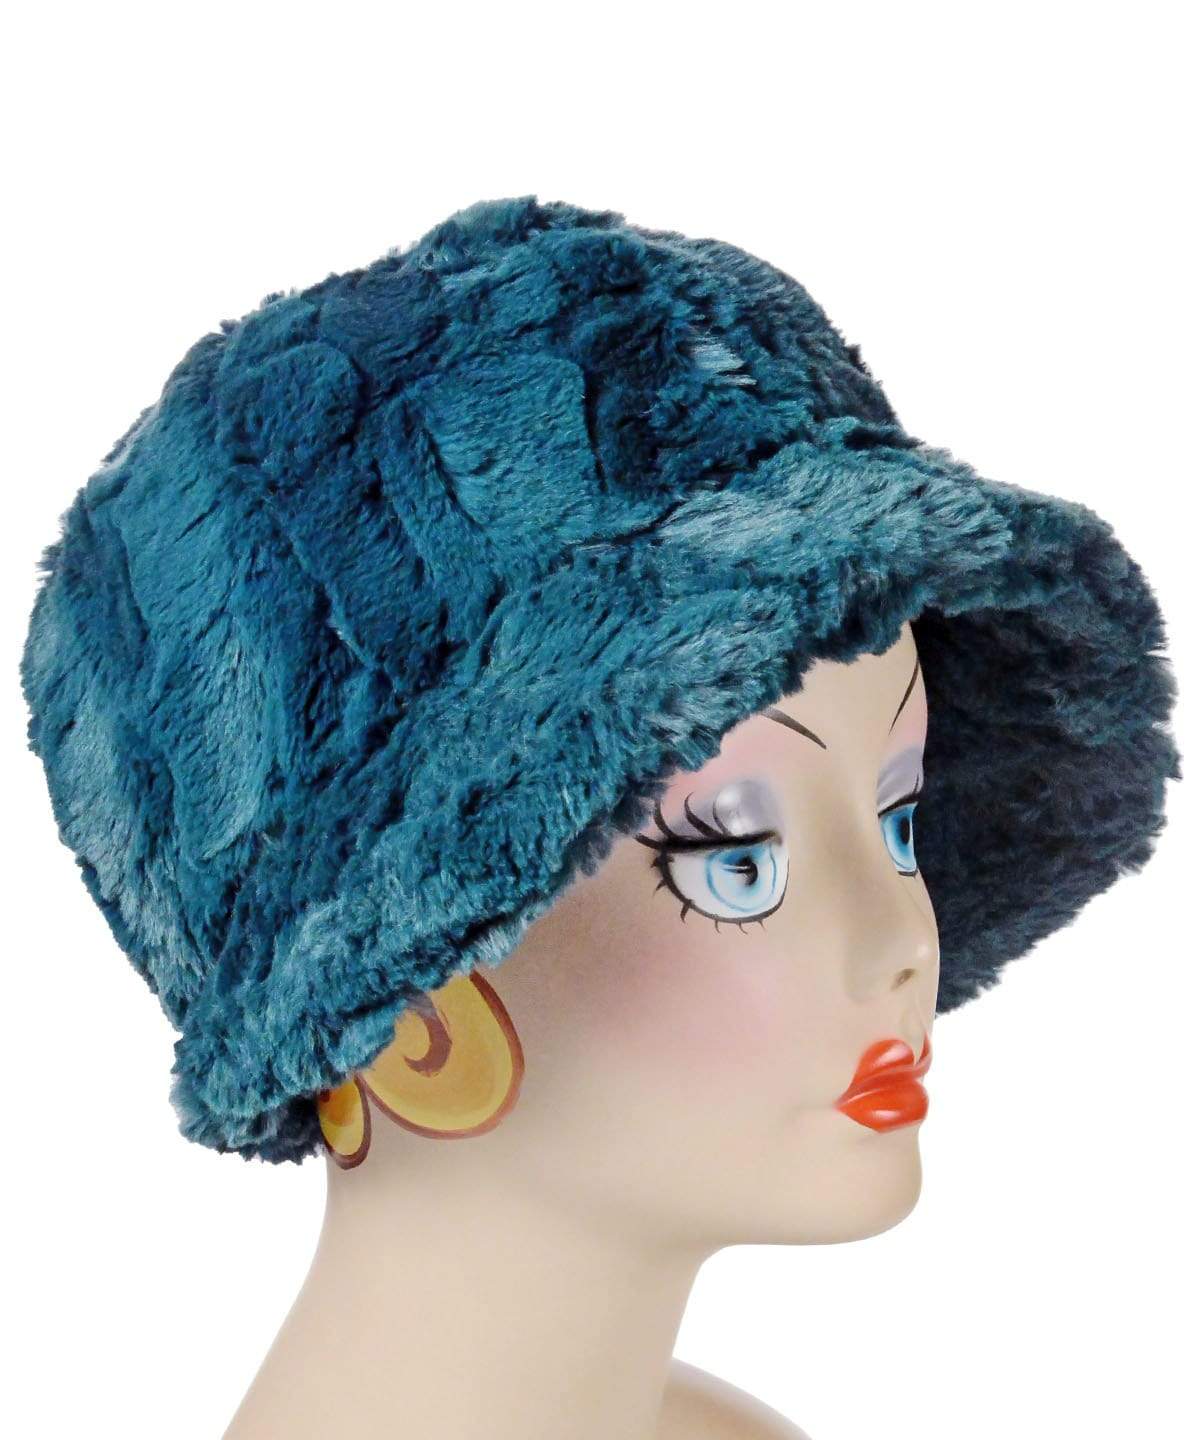 Grace Cloche 1920s Hat Style in Peacock Pond Faux Fur No Band | By Pandemonium Millinery | Handmade in Seattle WA USA